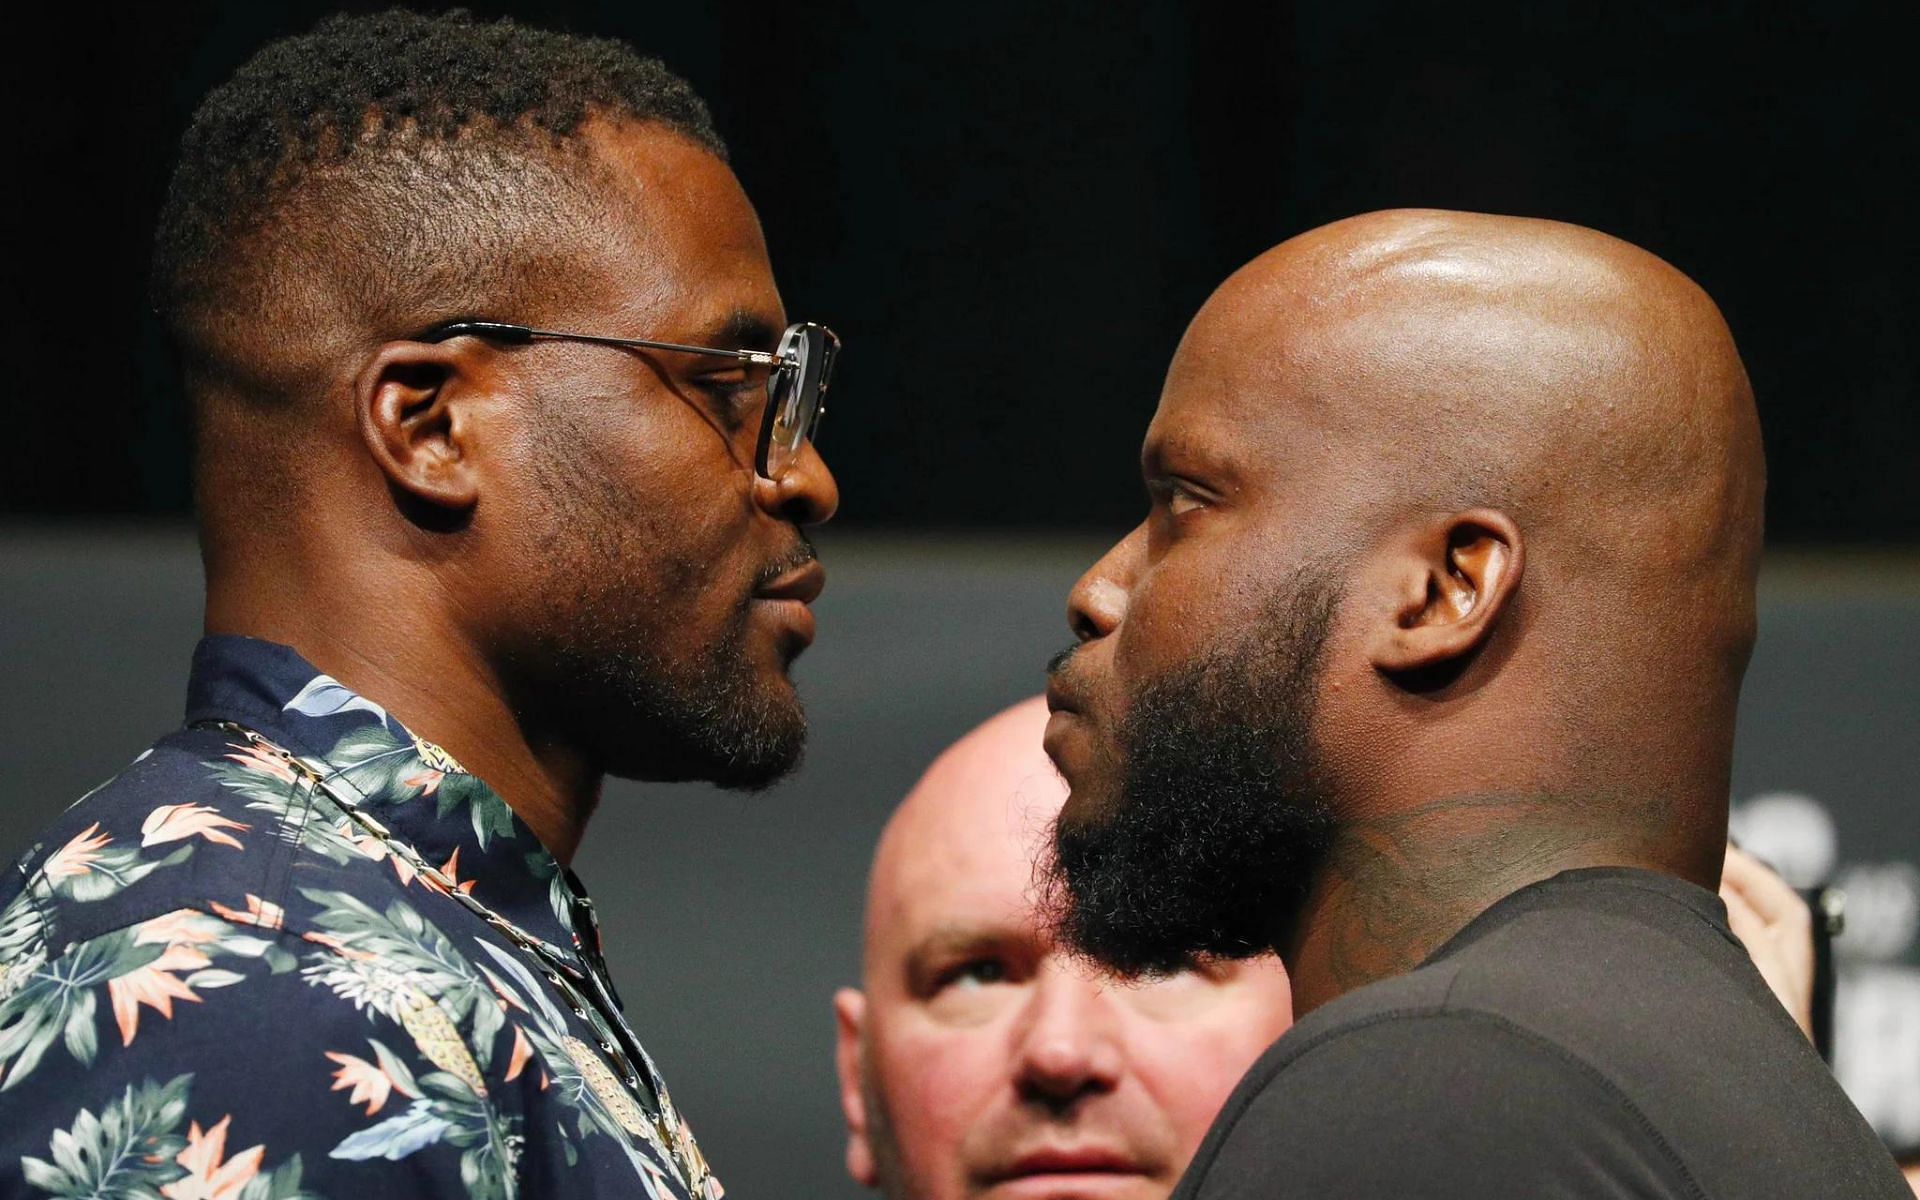 Francis Ngannou and Derrick Lewis face off before their UFC 226 clash in 2018 [Image courtesy: @MMAHistoryToday on Twitter]